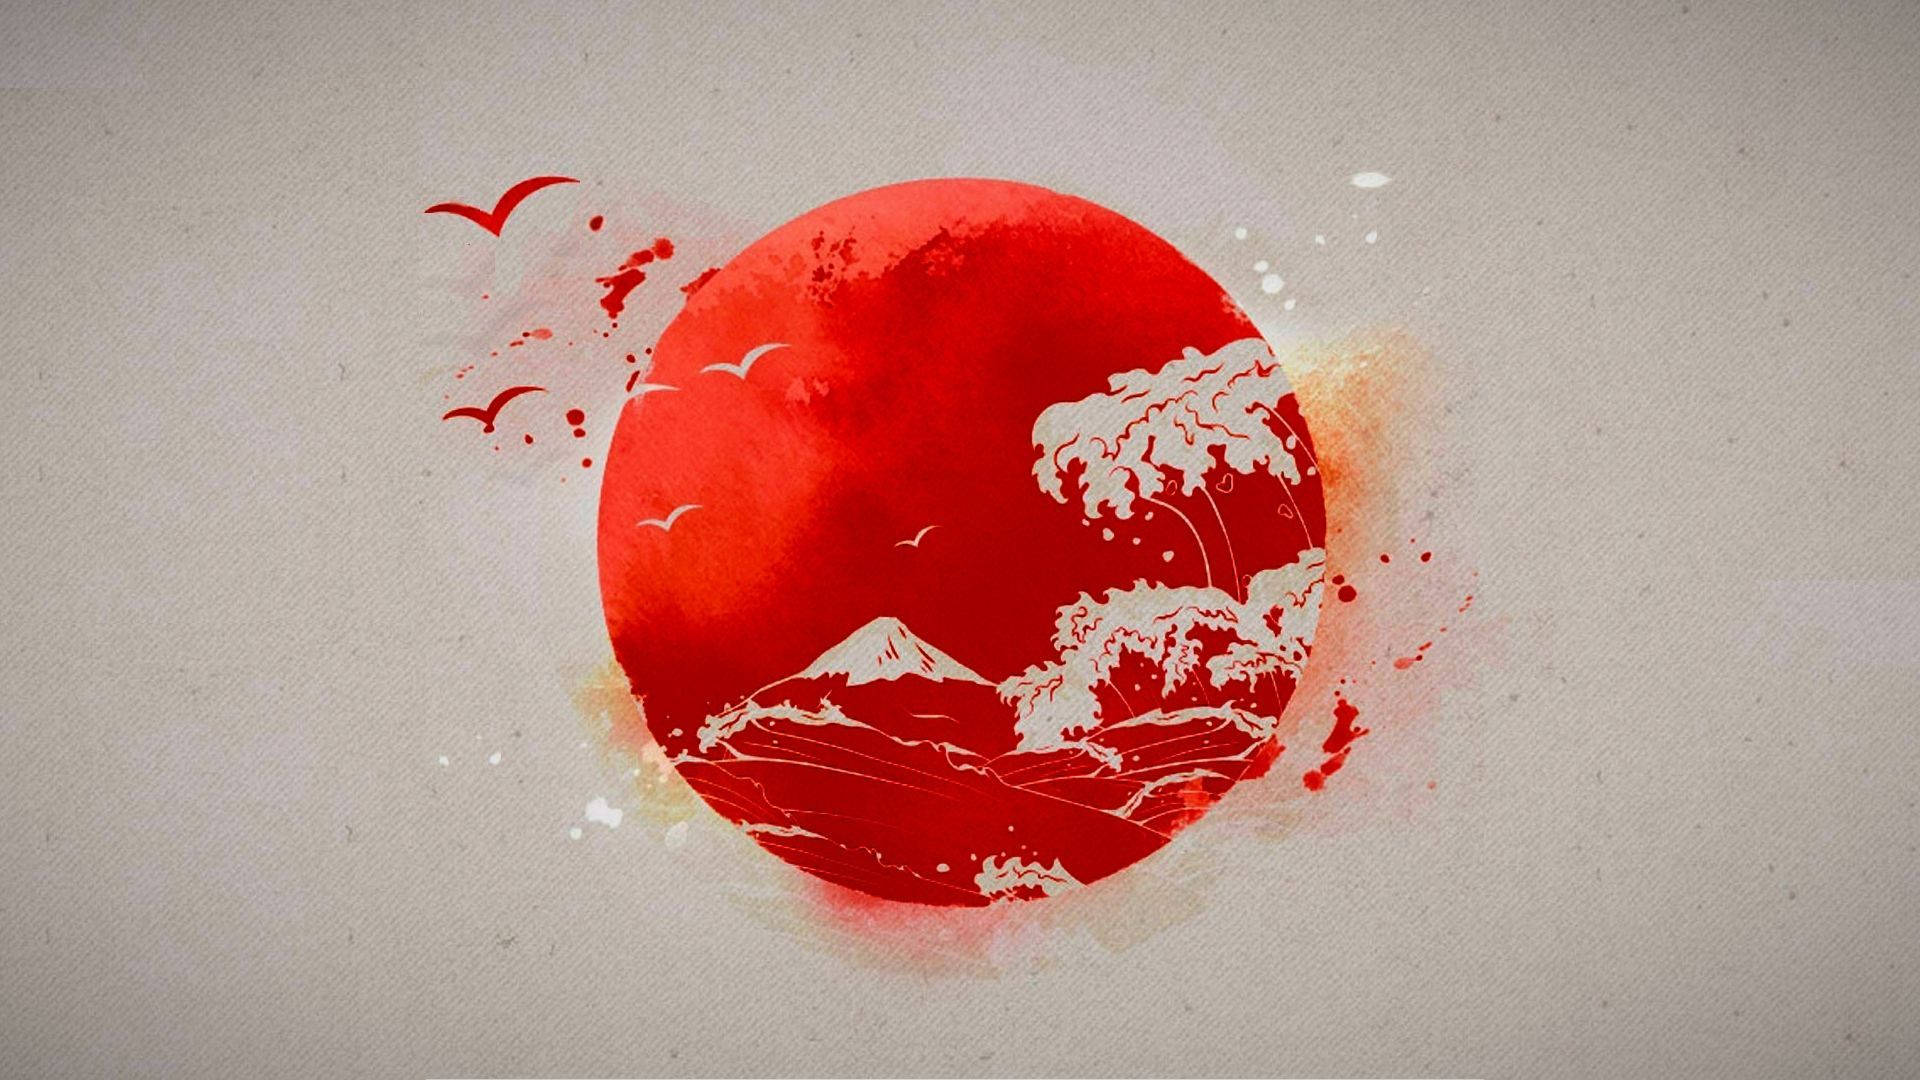 Aesthetic Photo Of A Japan Flag Wallpaper